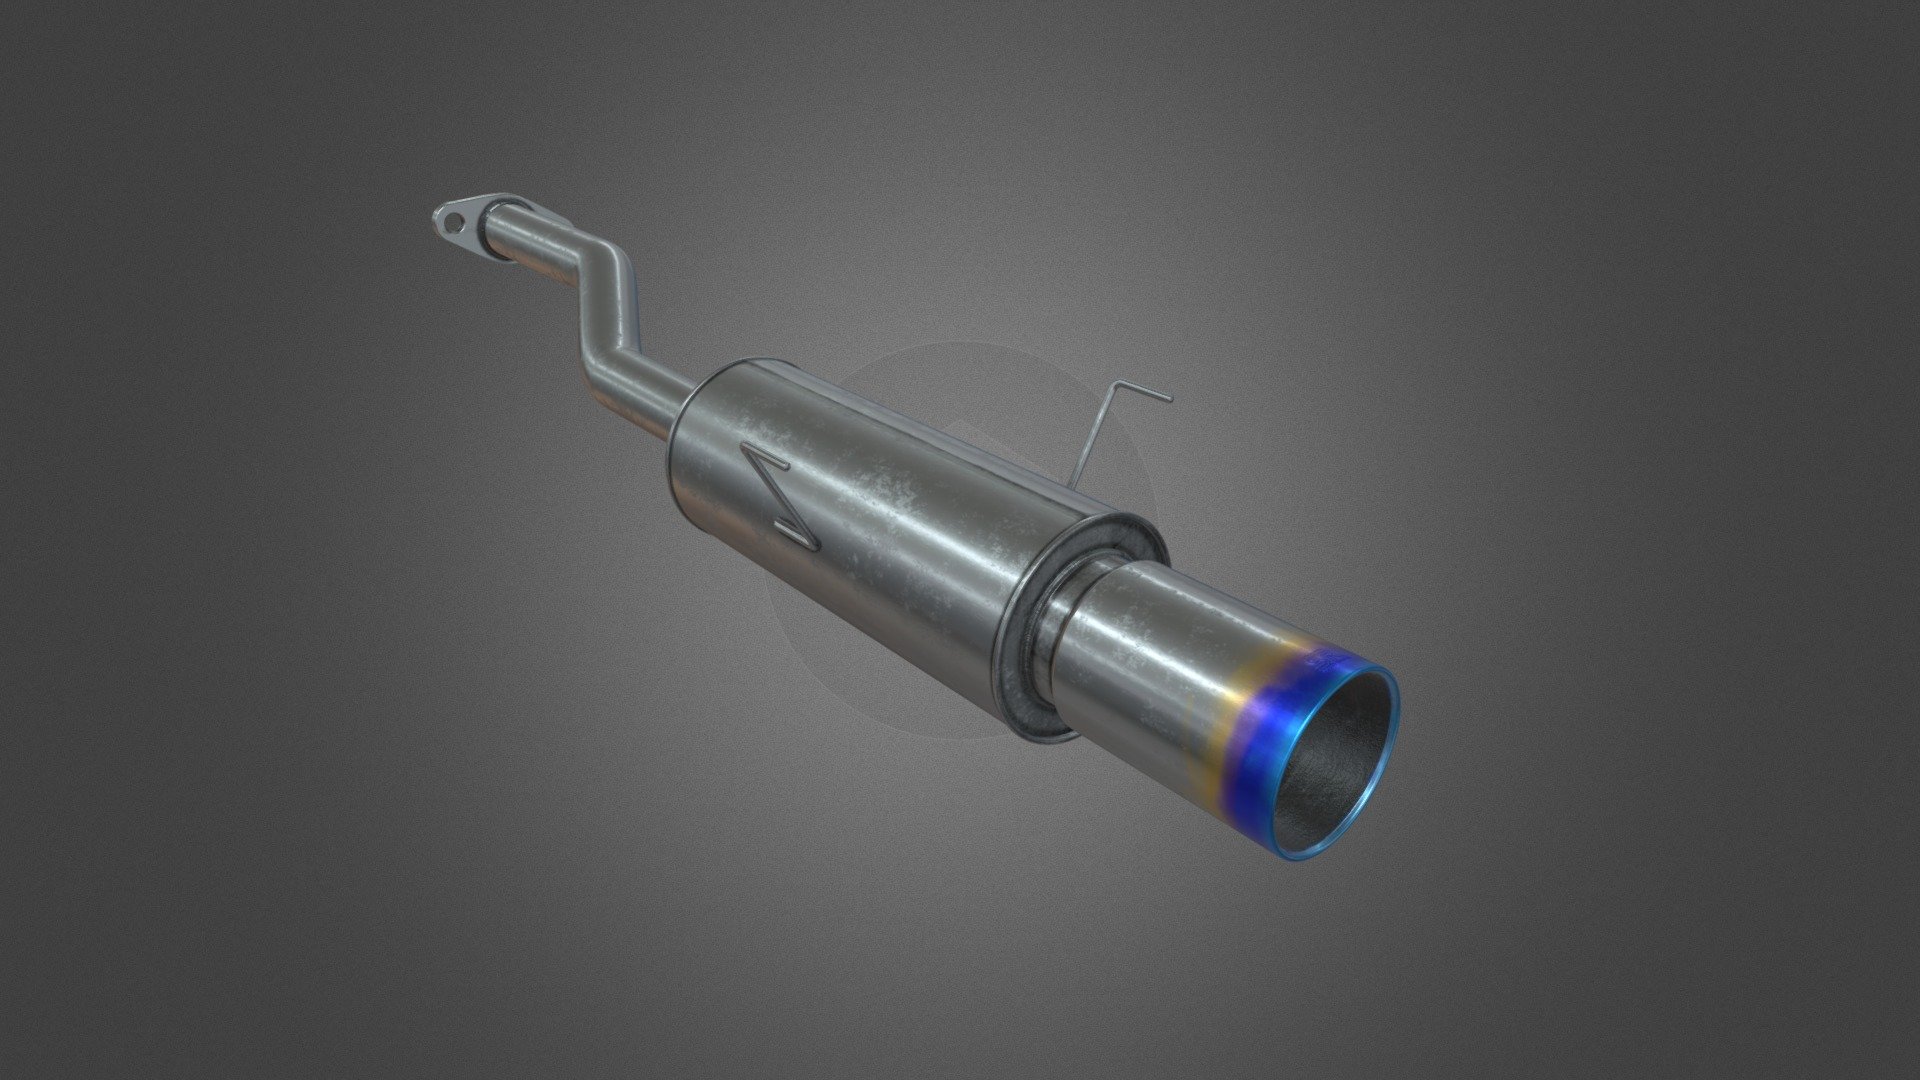 Titanium style exhaust / muffler / backbox for kitbashing. Suitable for race cars, street cars or whatever you like! Not based on any exhaust system; it may take some adjustments to fit your project model.

If you like what you see please consider liking and following my social feeds:

@pjscottartist

Thank you for looking 3d model